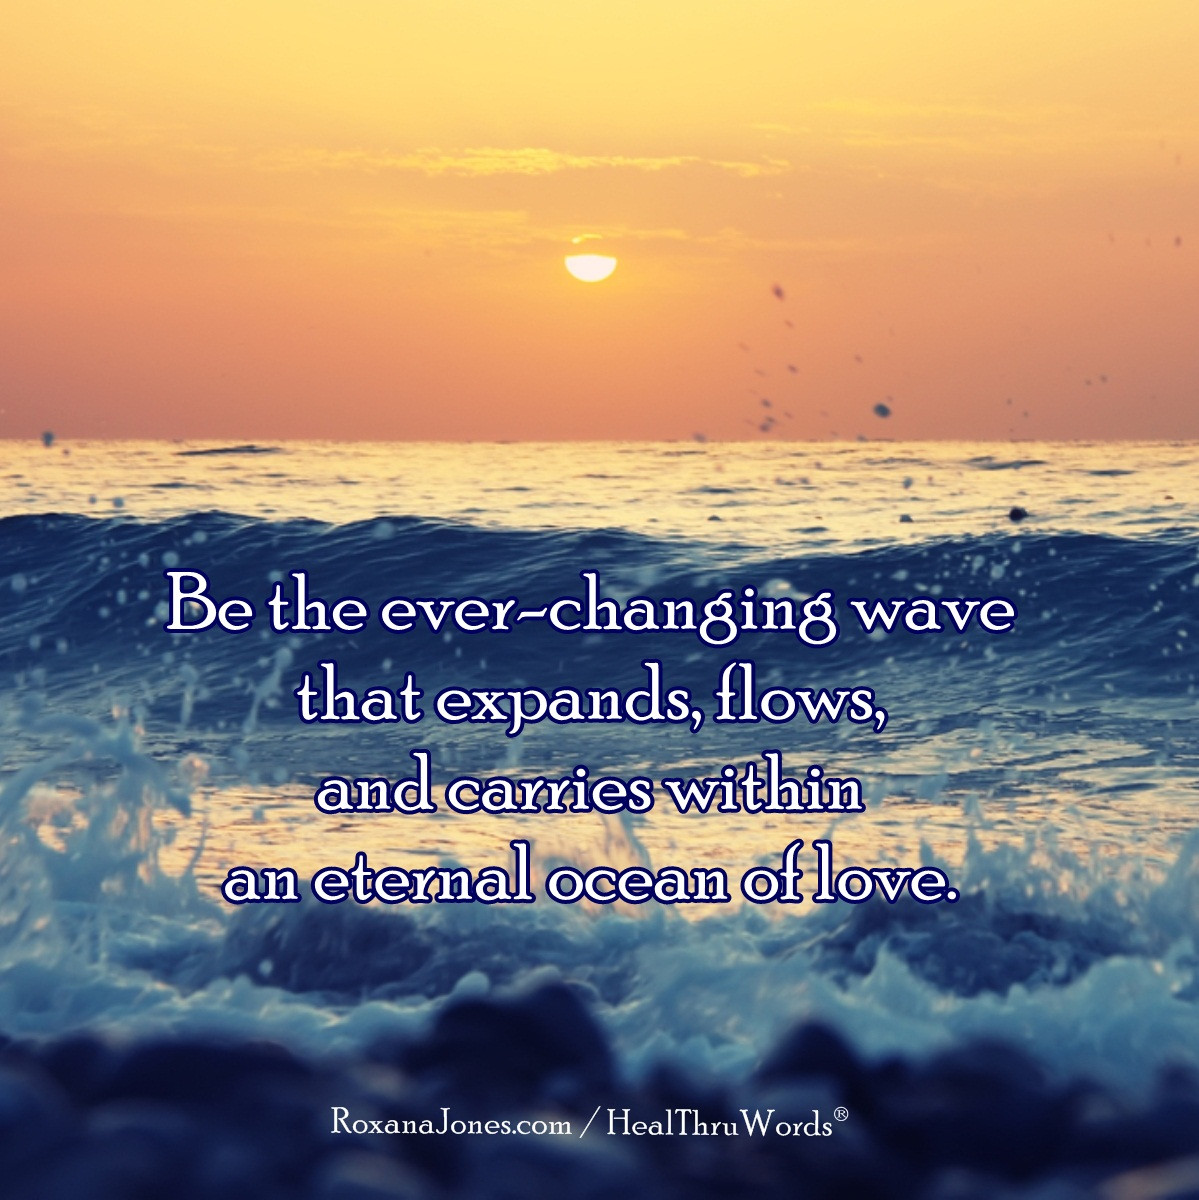 Quotes About The Ocean And Love
 Ocean of Love Inspirational